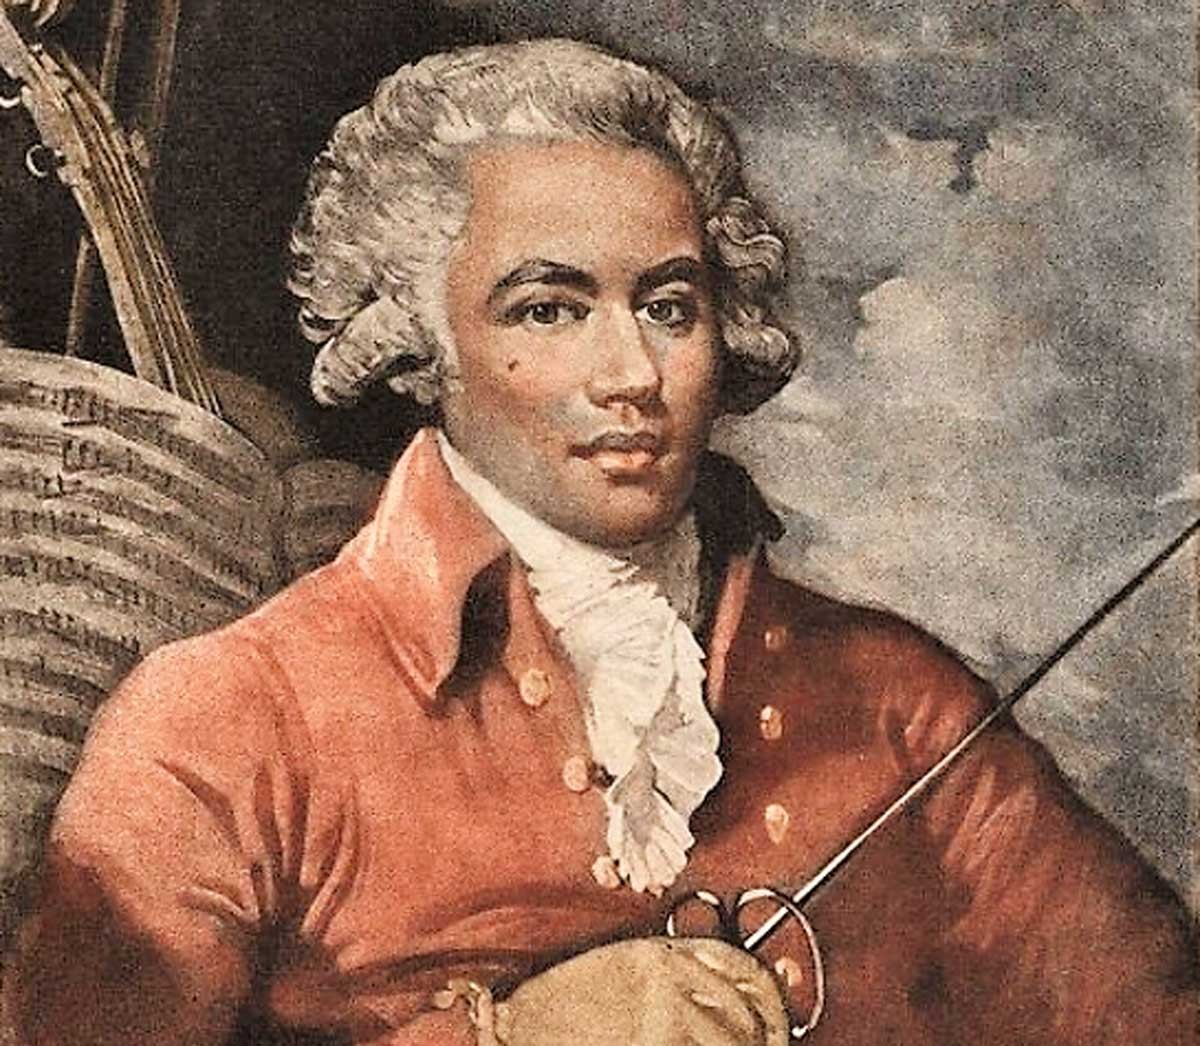 Chevalier de Saint-Georges is considered the first known classical music composer of African descent.